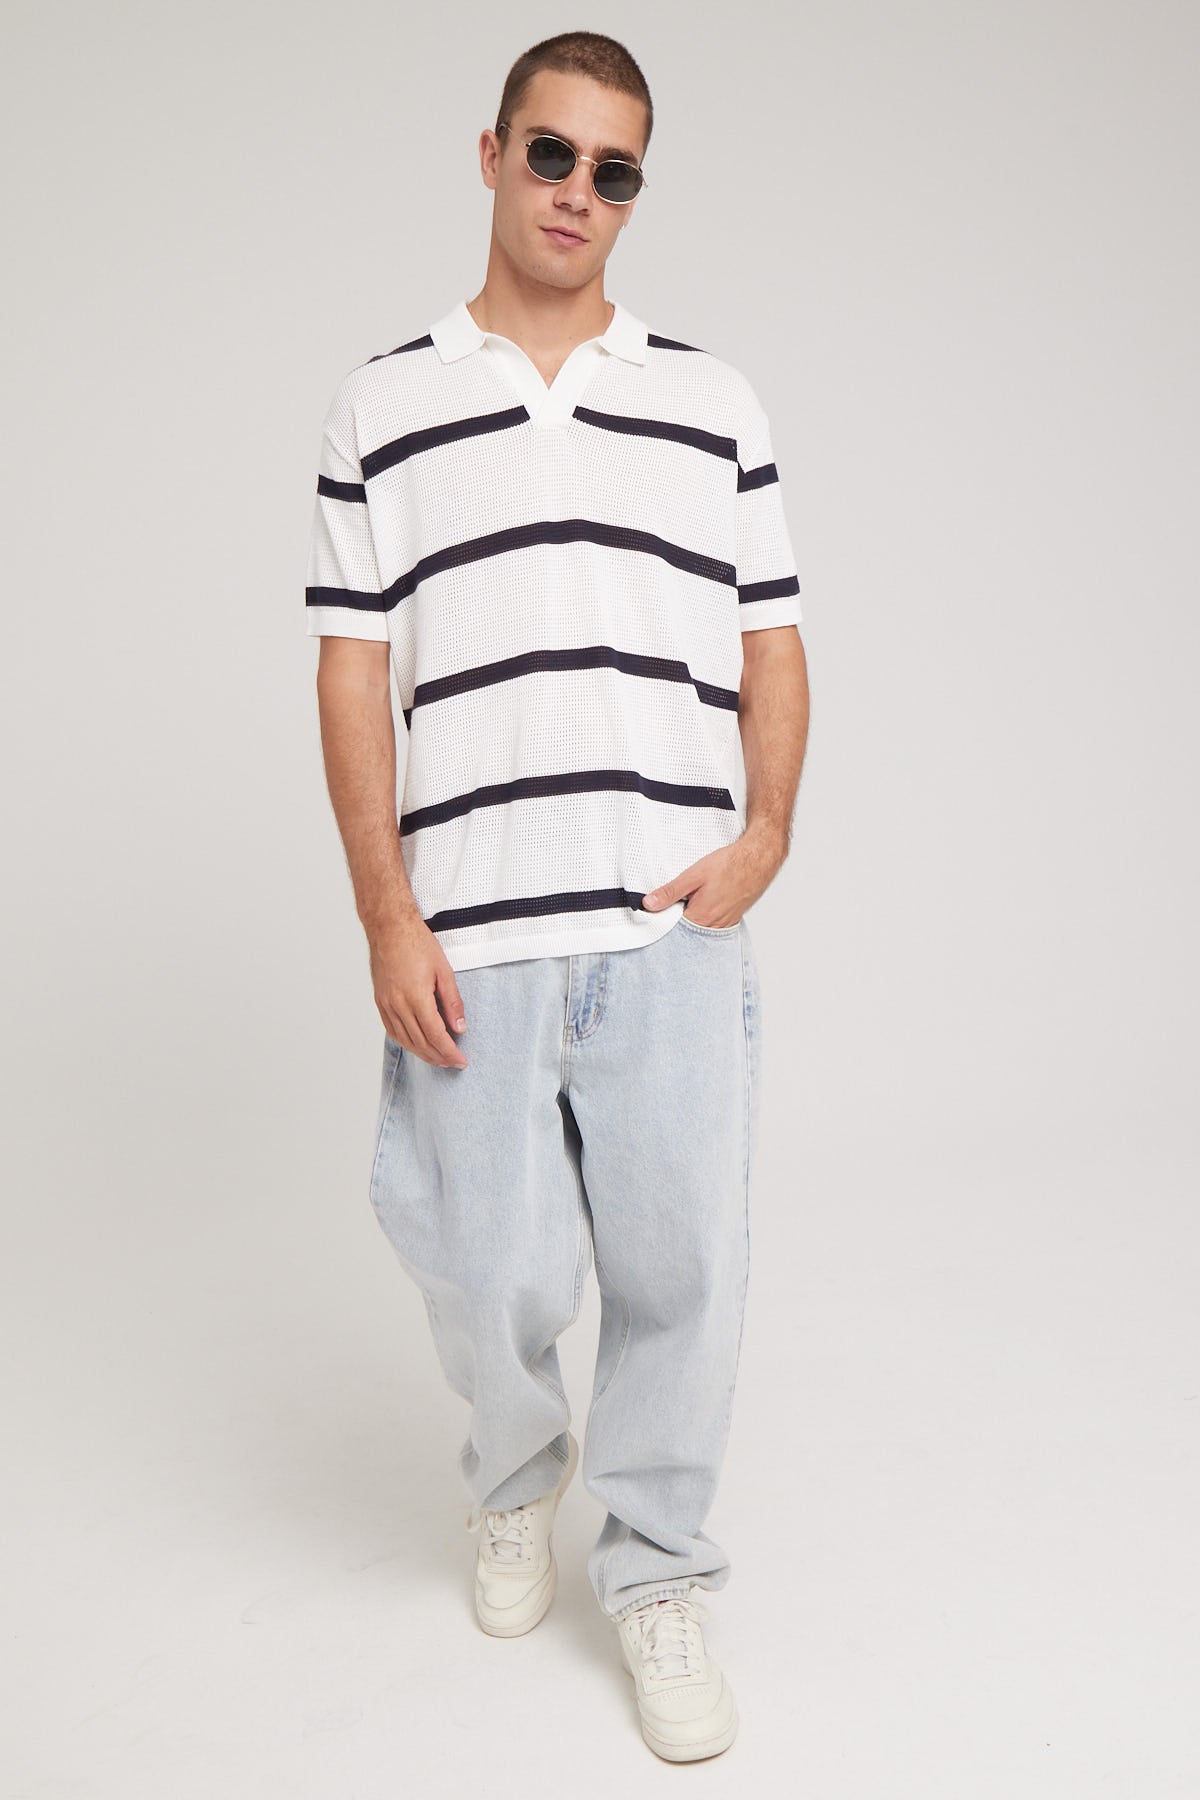 Common Need Port Knit Polo Off White/Navy